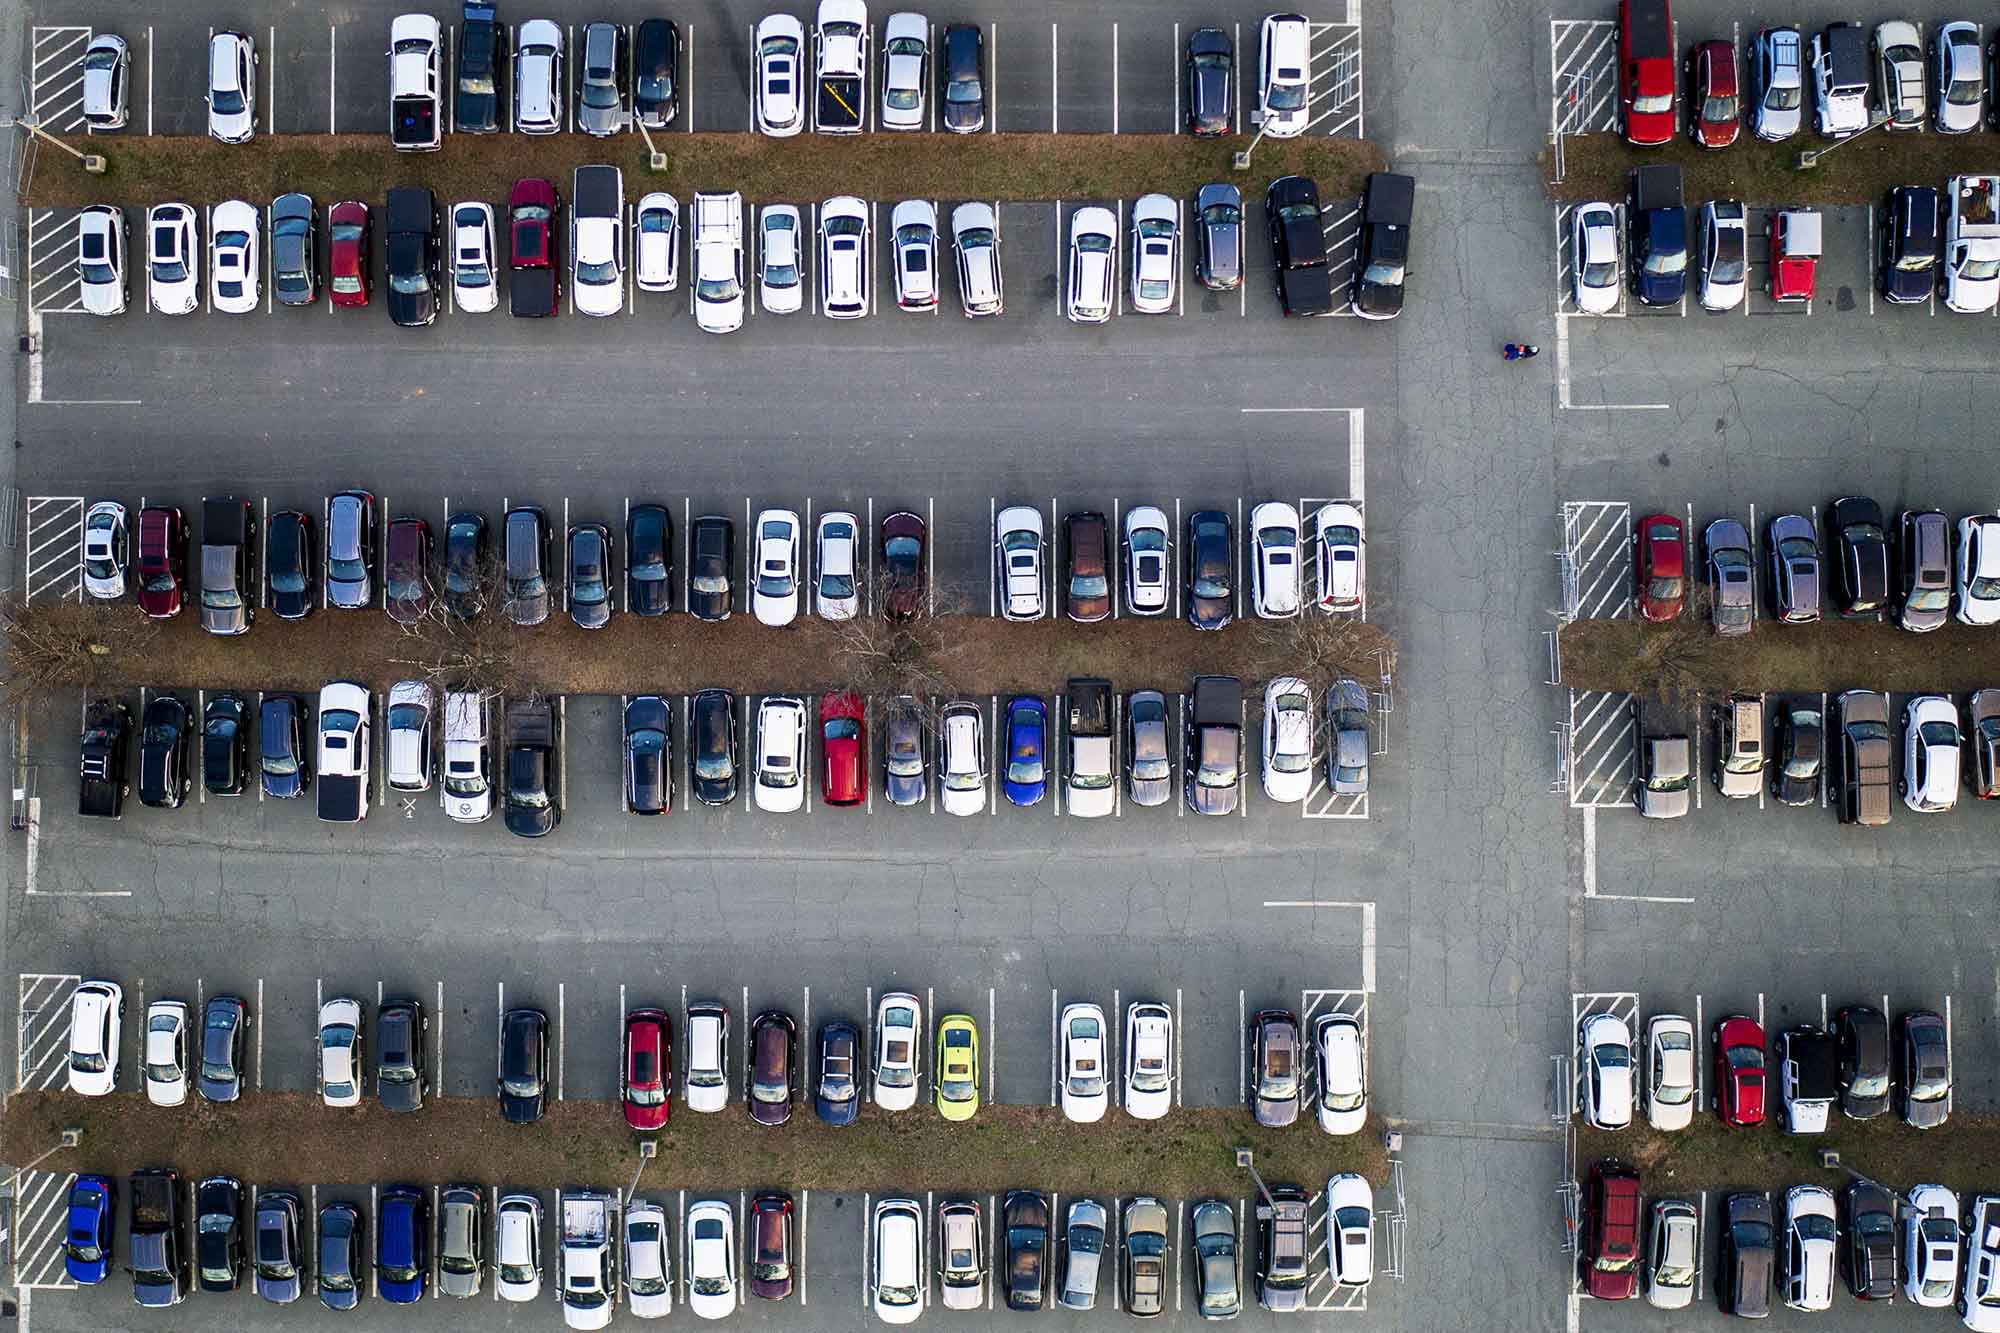 Arial view of a parking lot with cars parked